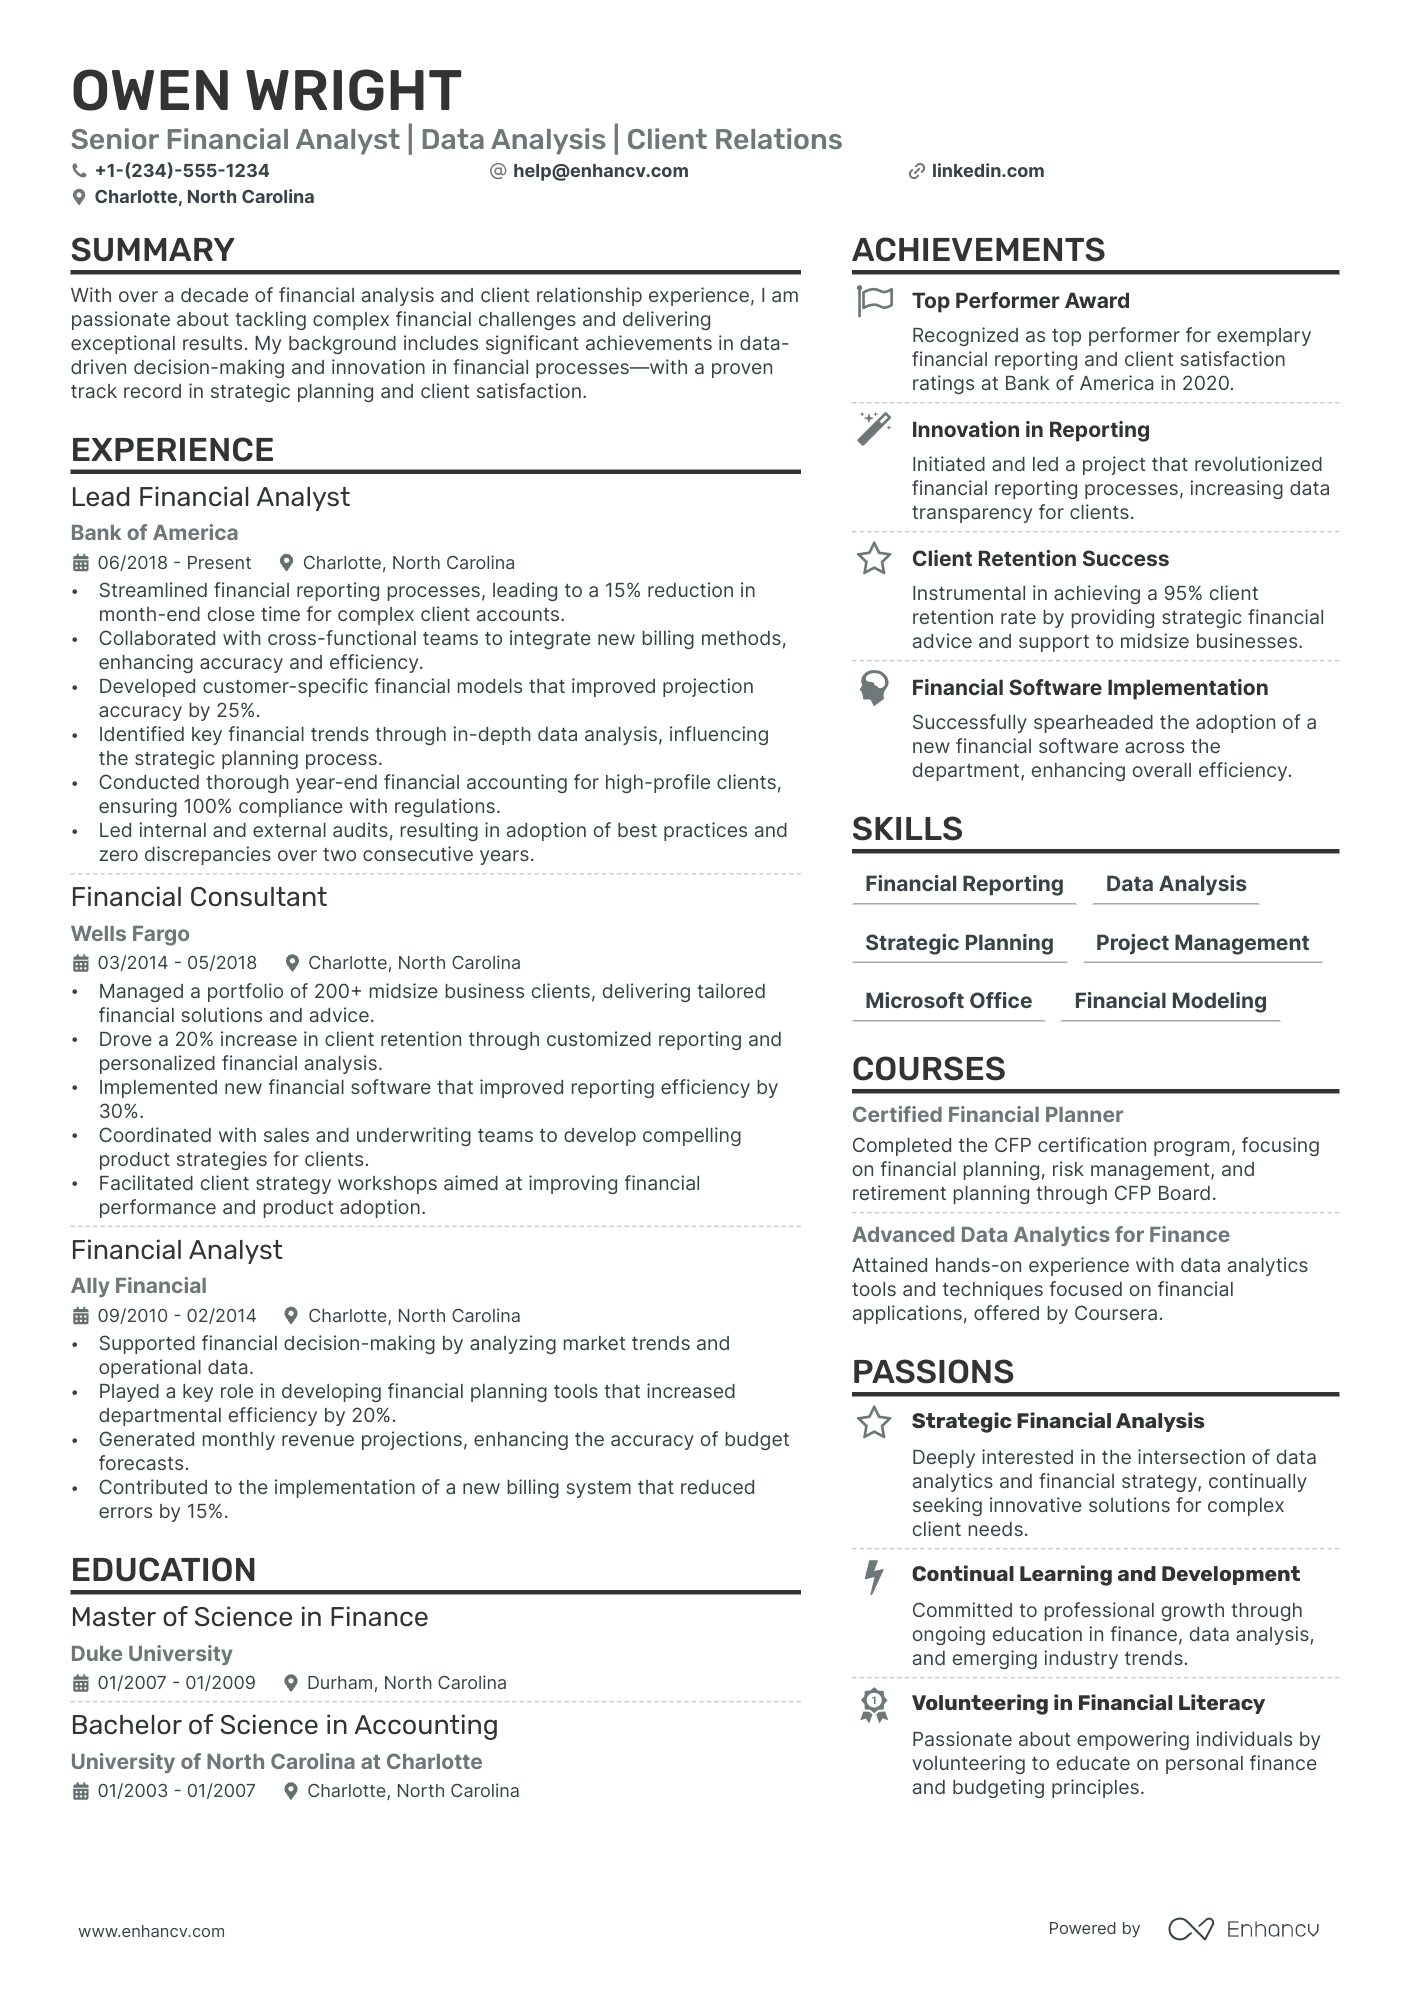 Financial Consultant resume example